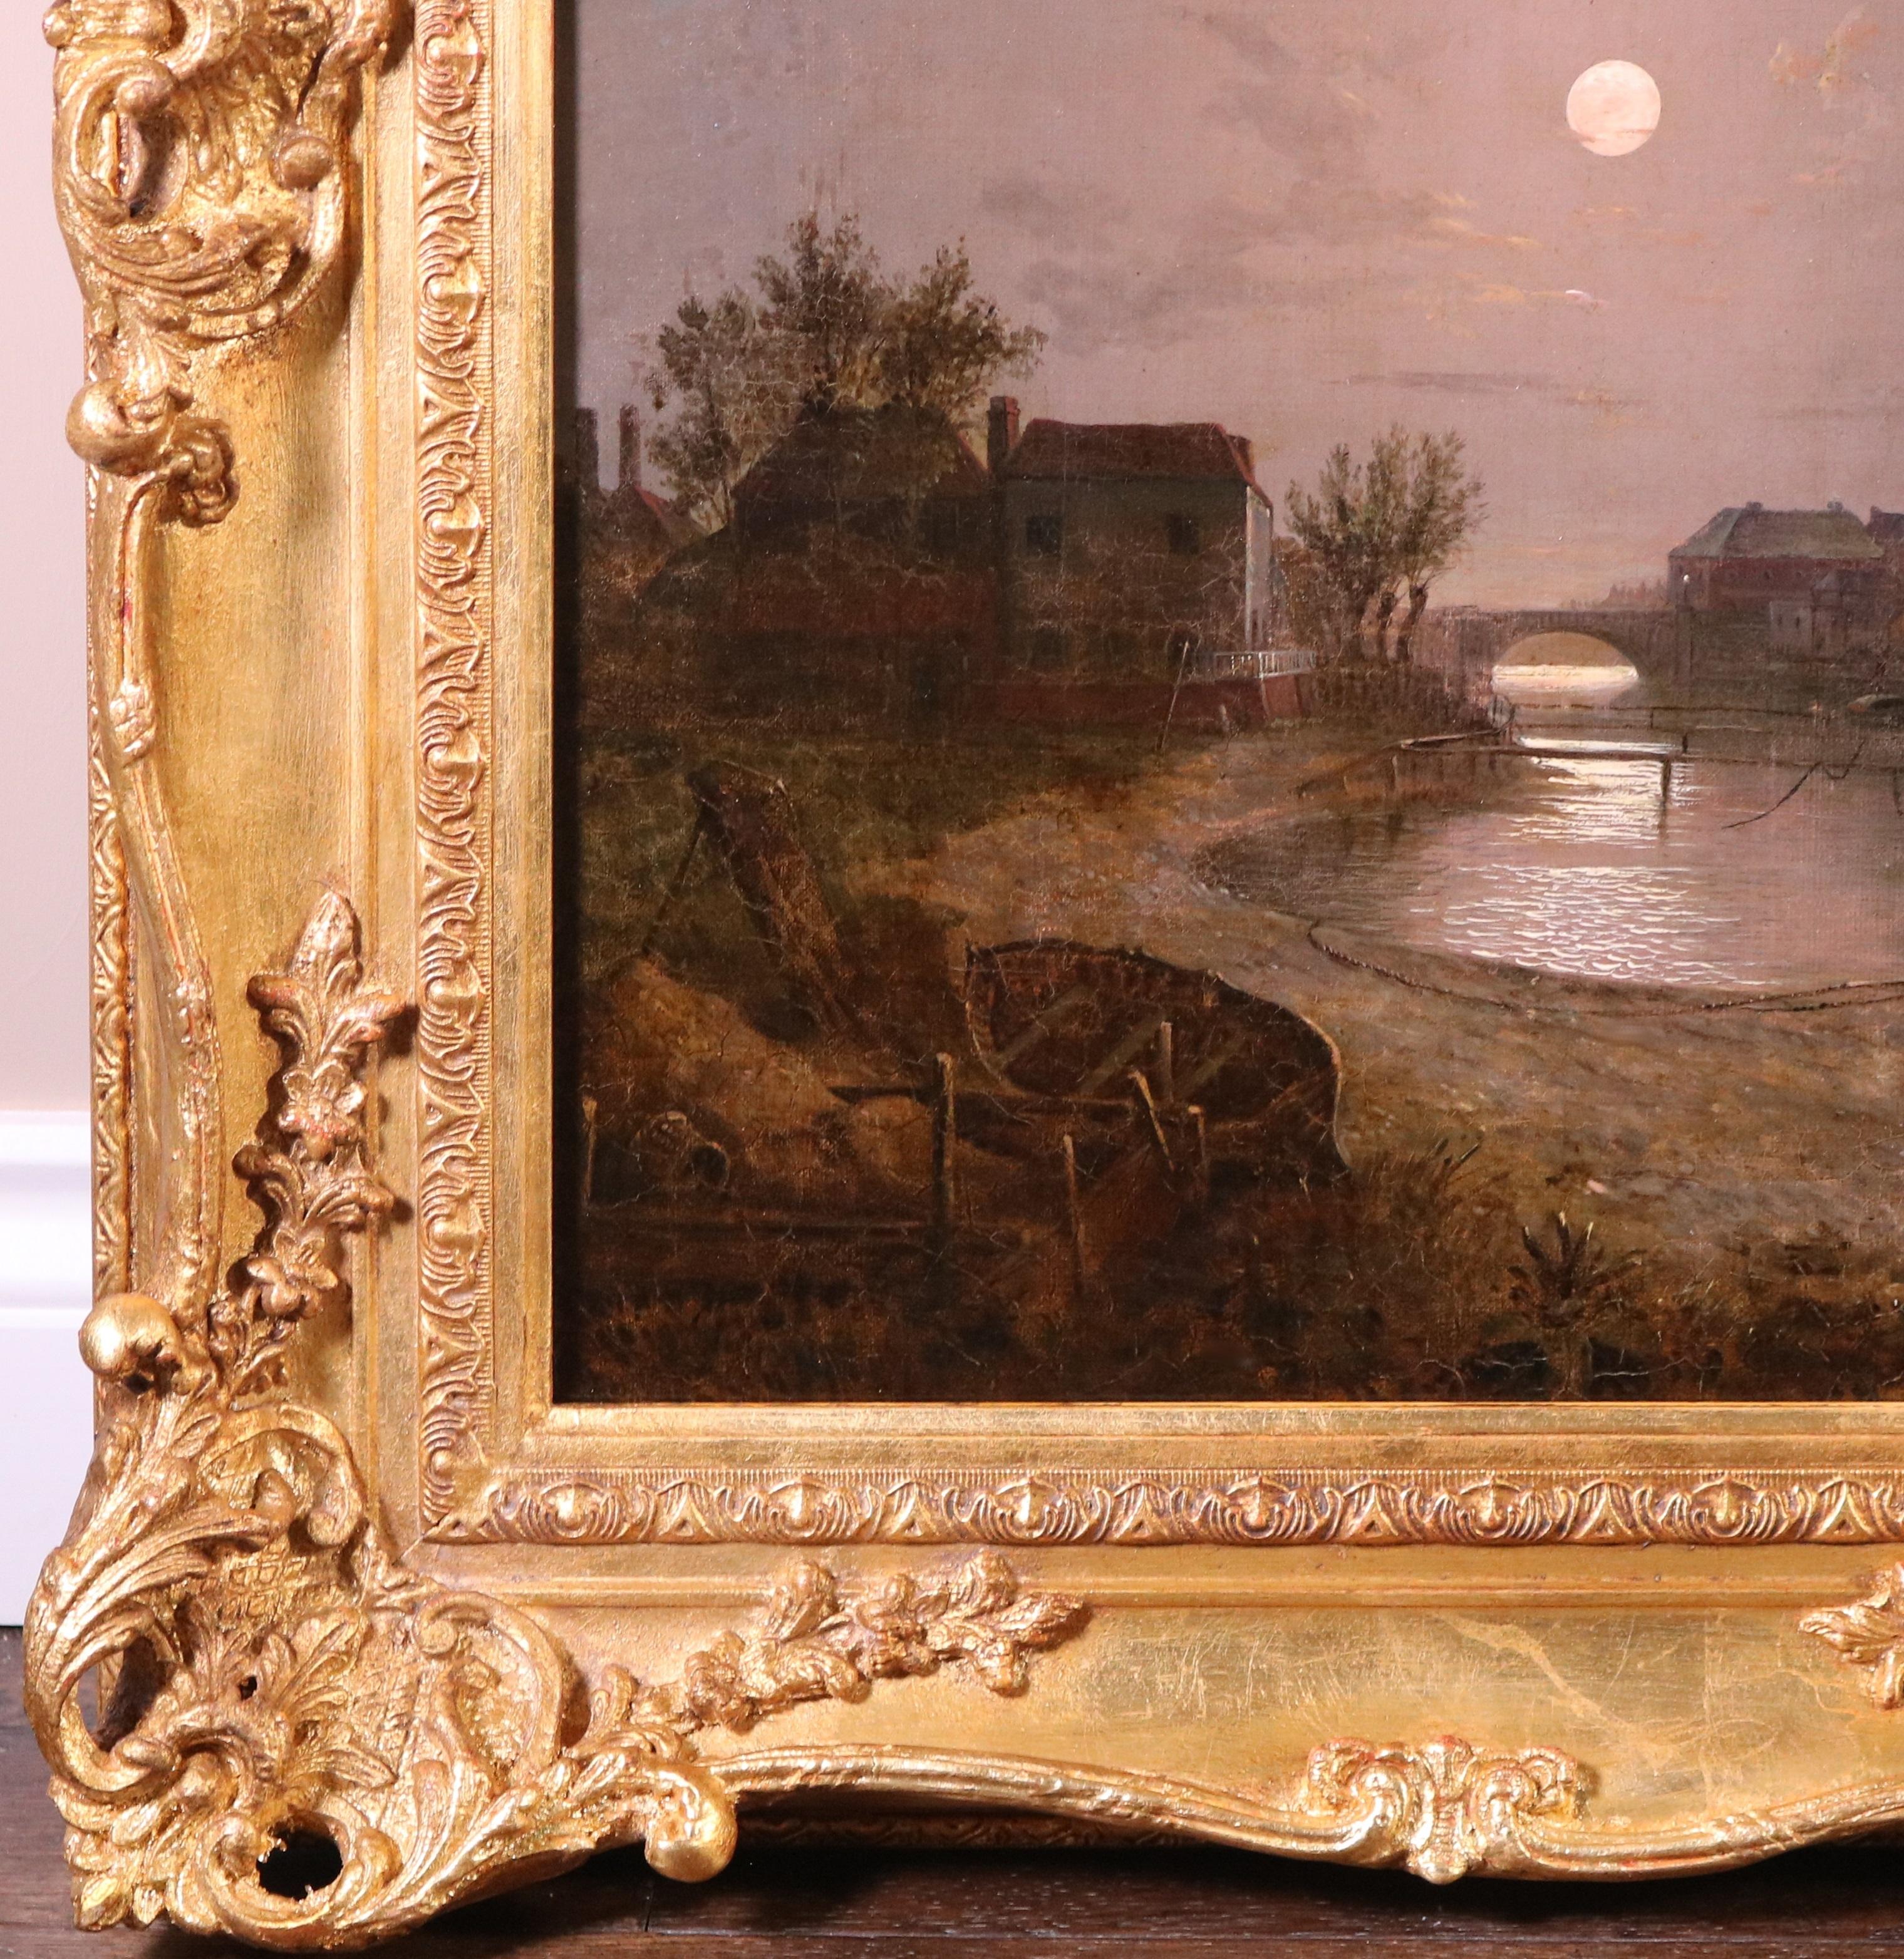 Scene on the Thames - Moonlight - Early 19th Century Nocturne Landscape Painting 4